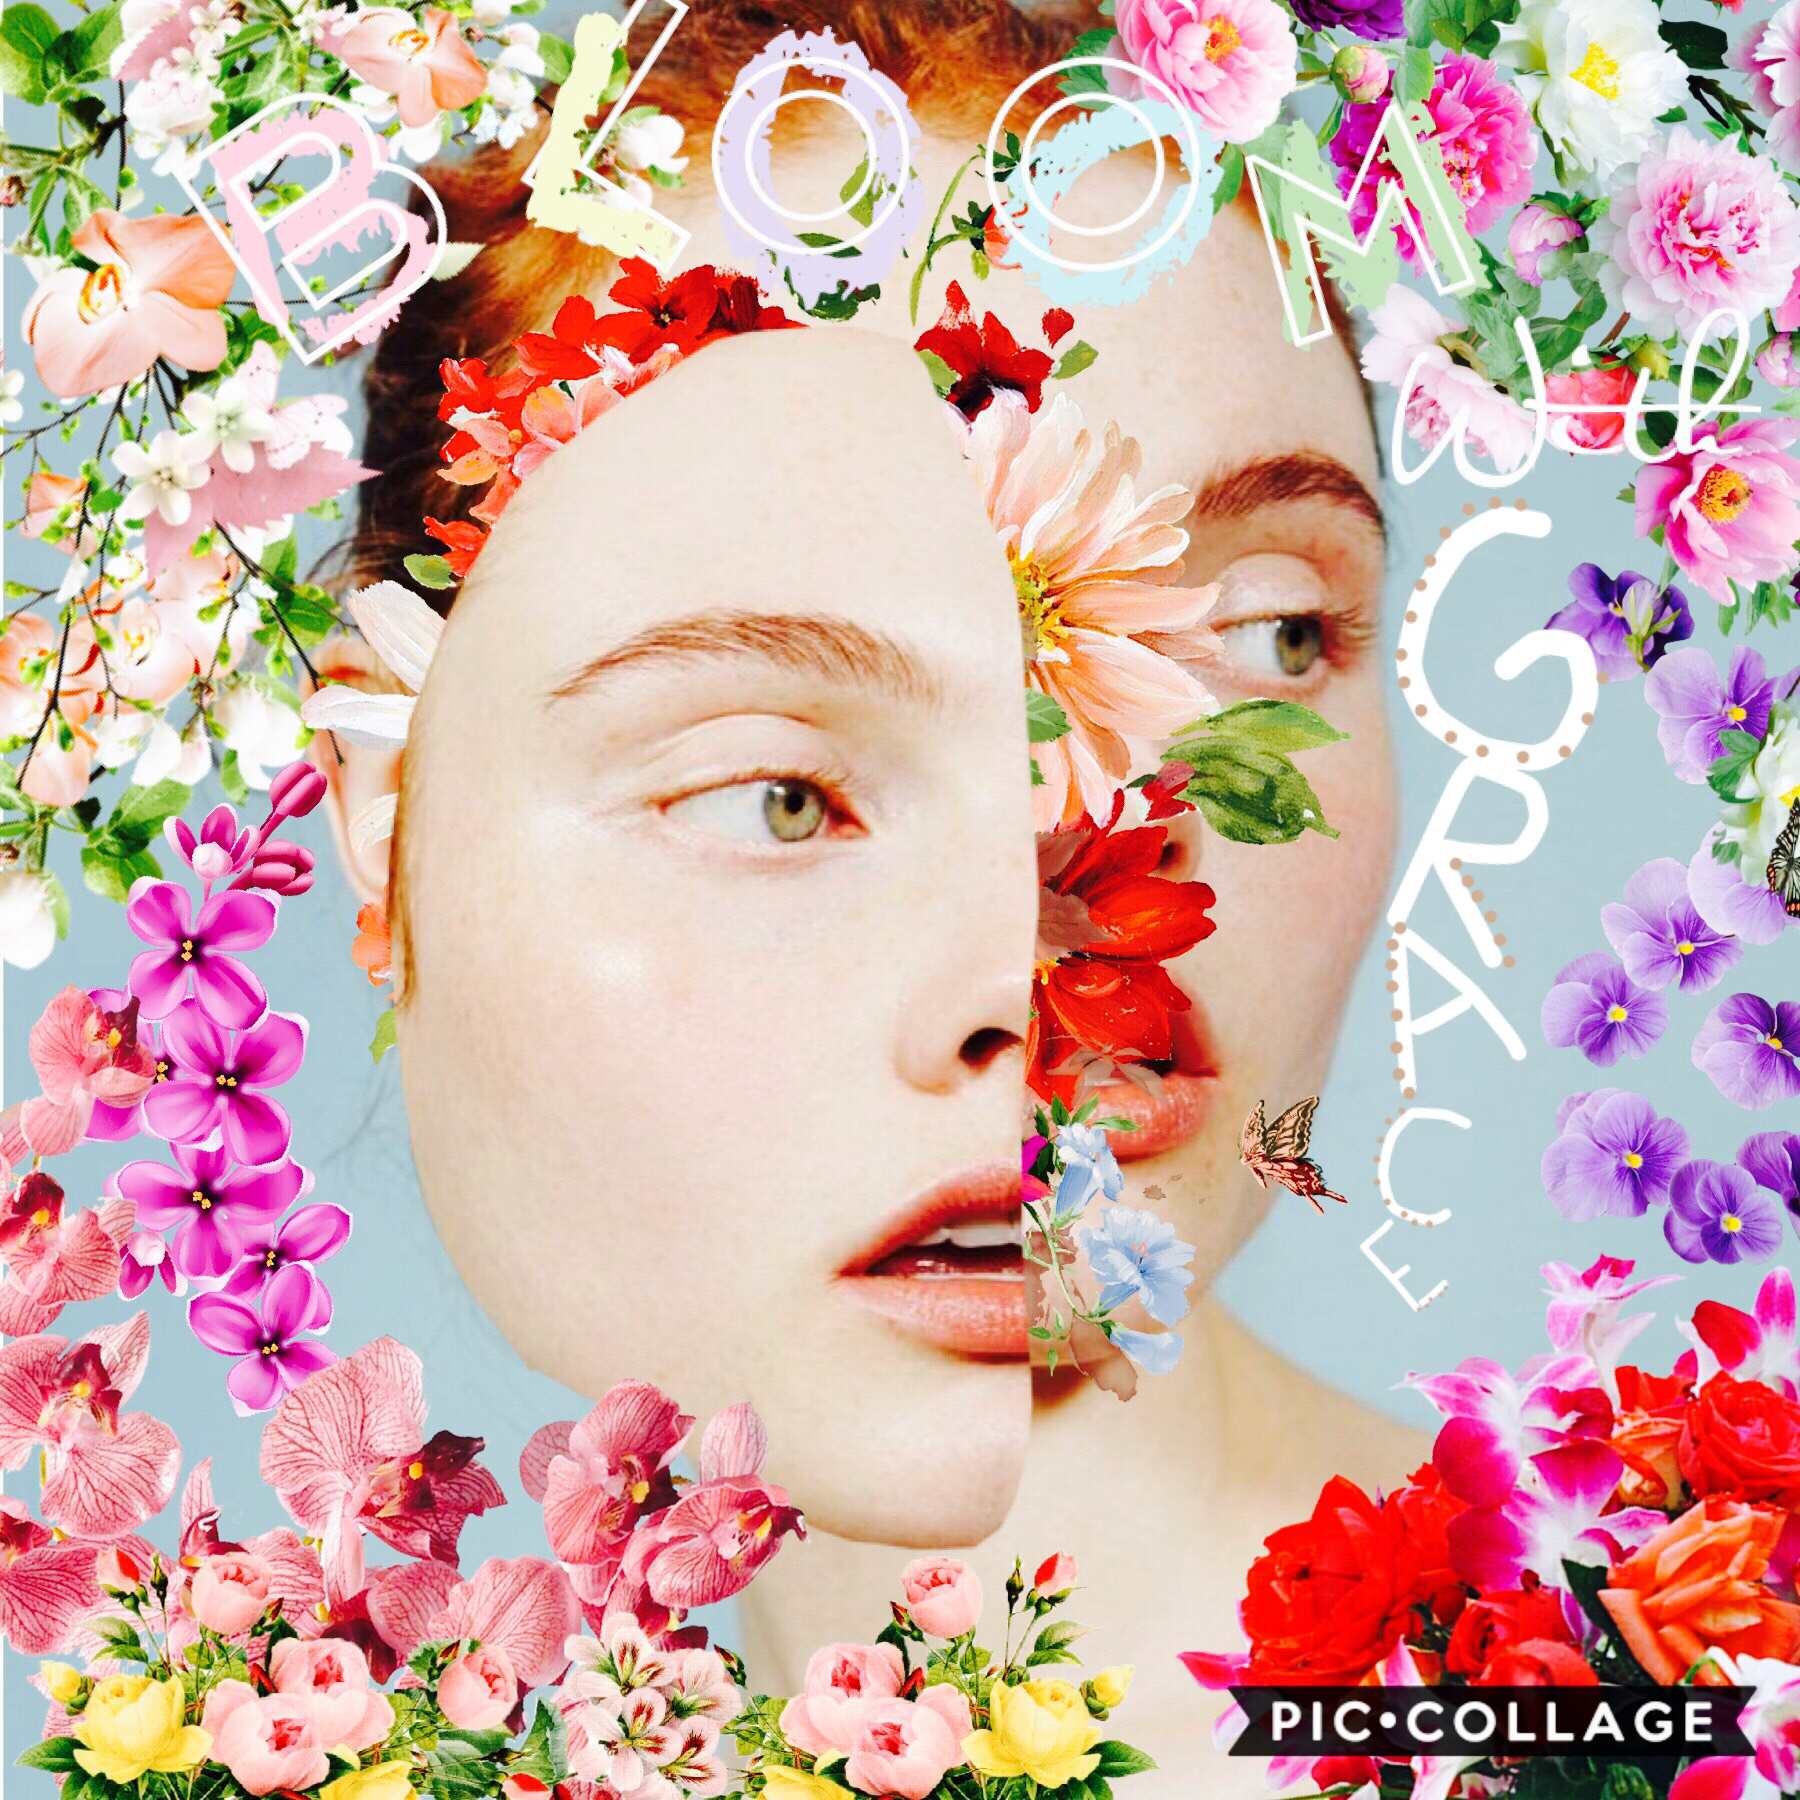 ✨tap✨
𝒷𝓁𝑜𝑜𝓂 𝓌𝒾𝓉𝒽 𝑔𝓇𝒶𝒸𝑒
This was inspired by... The_Bear_With_The_Petals. I absolutely love her style so I decided to try it! Definitely not as good as her collages... but it was still fun to make!💗😊
QOTD: favorite music genre?
AOTD: classical
𝒽𝒶𝓋𝑒 𝒶 𝓁𝑜𝓋𝑒𝓁